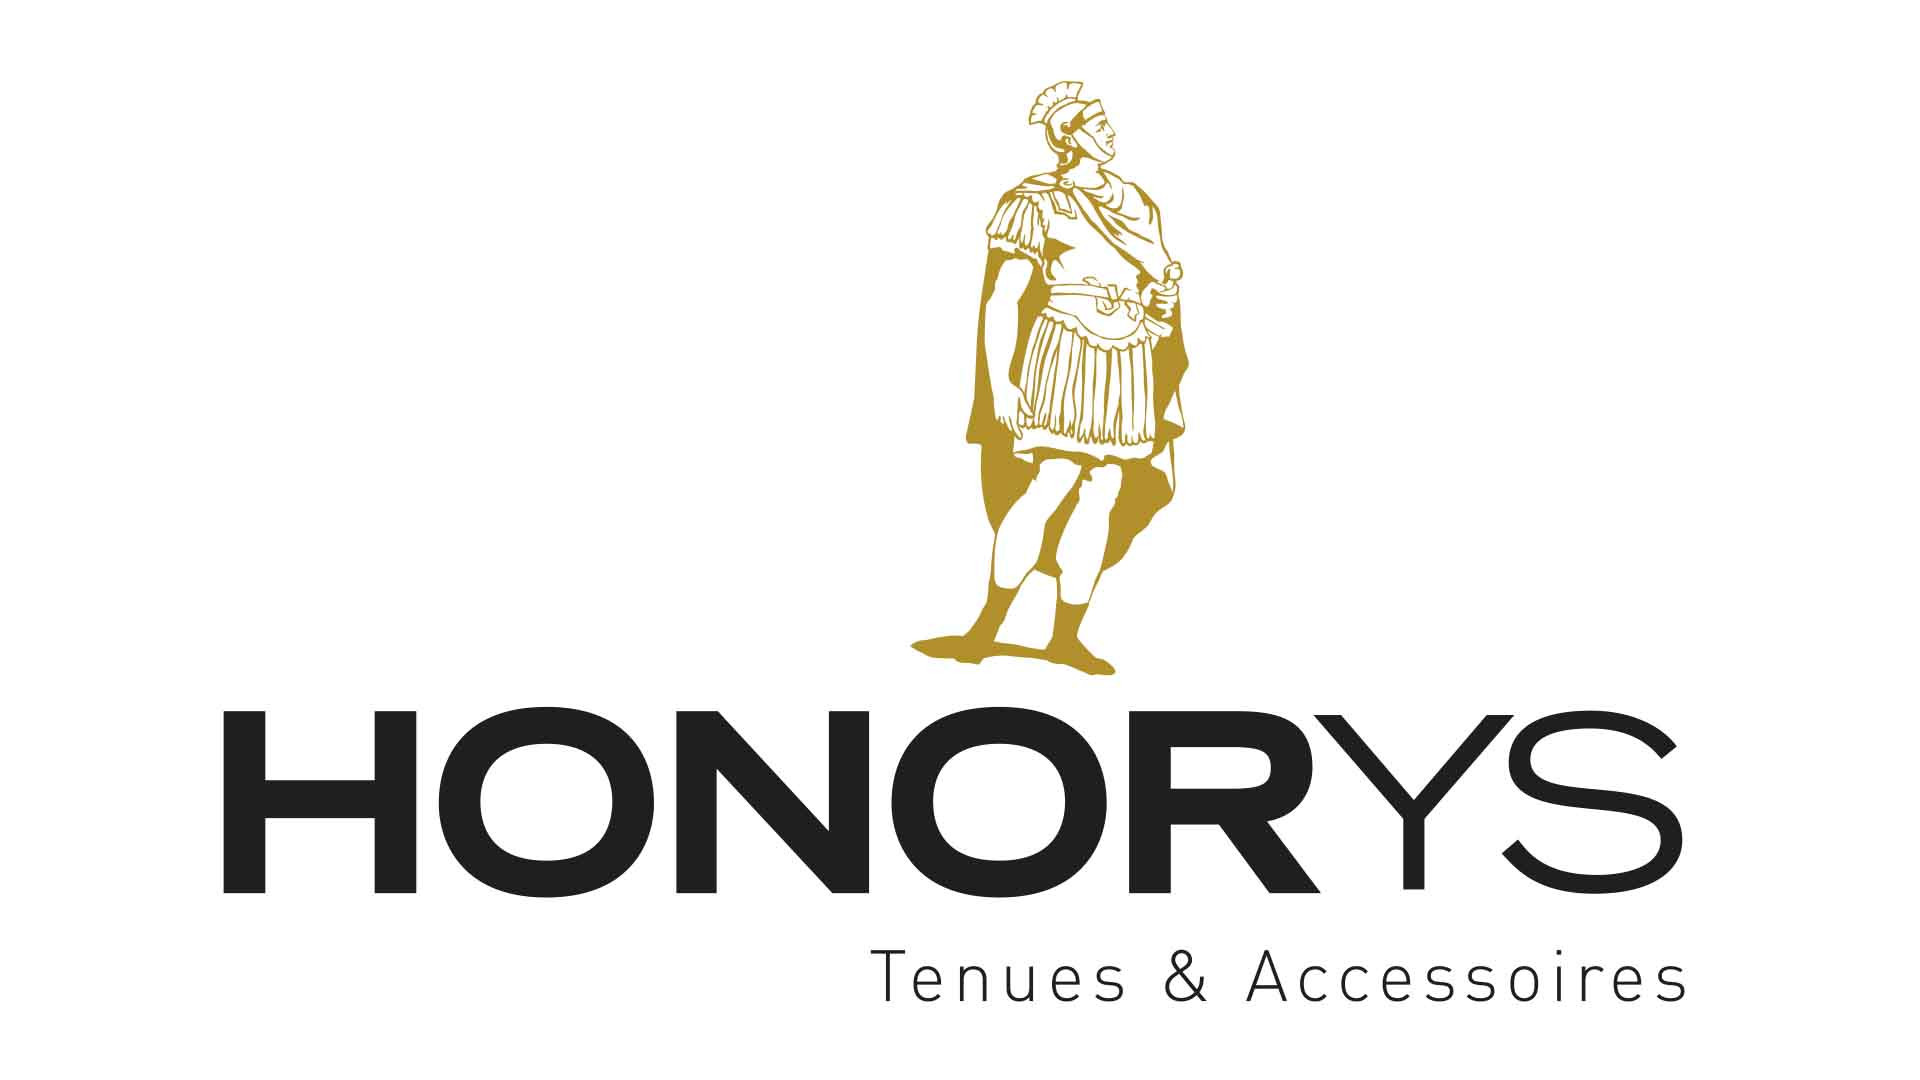 Honorys